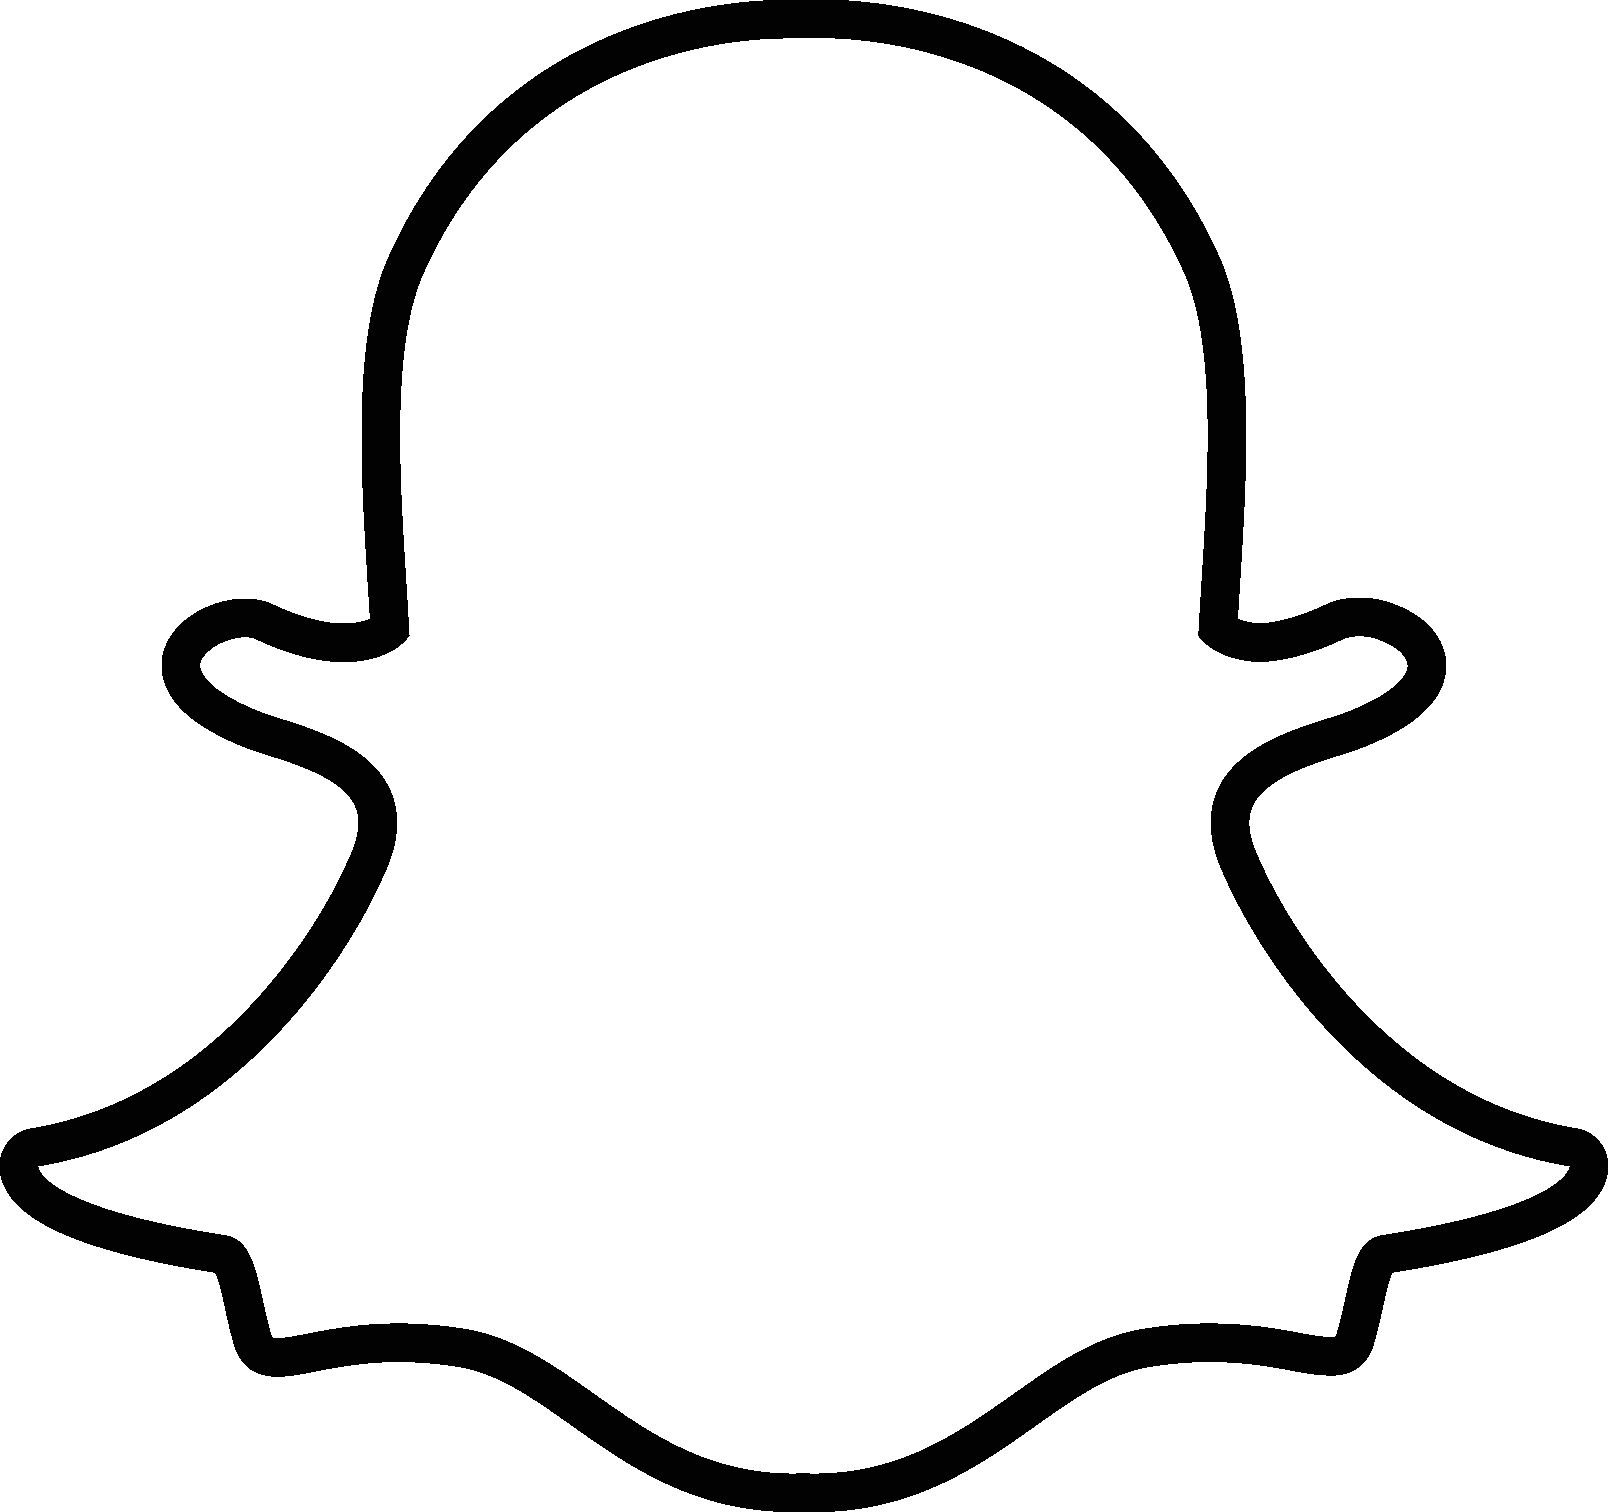 Tags: snapchat app, online messaging apps